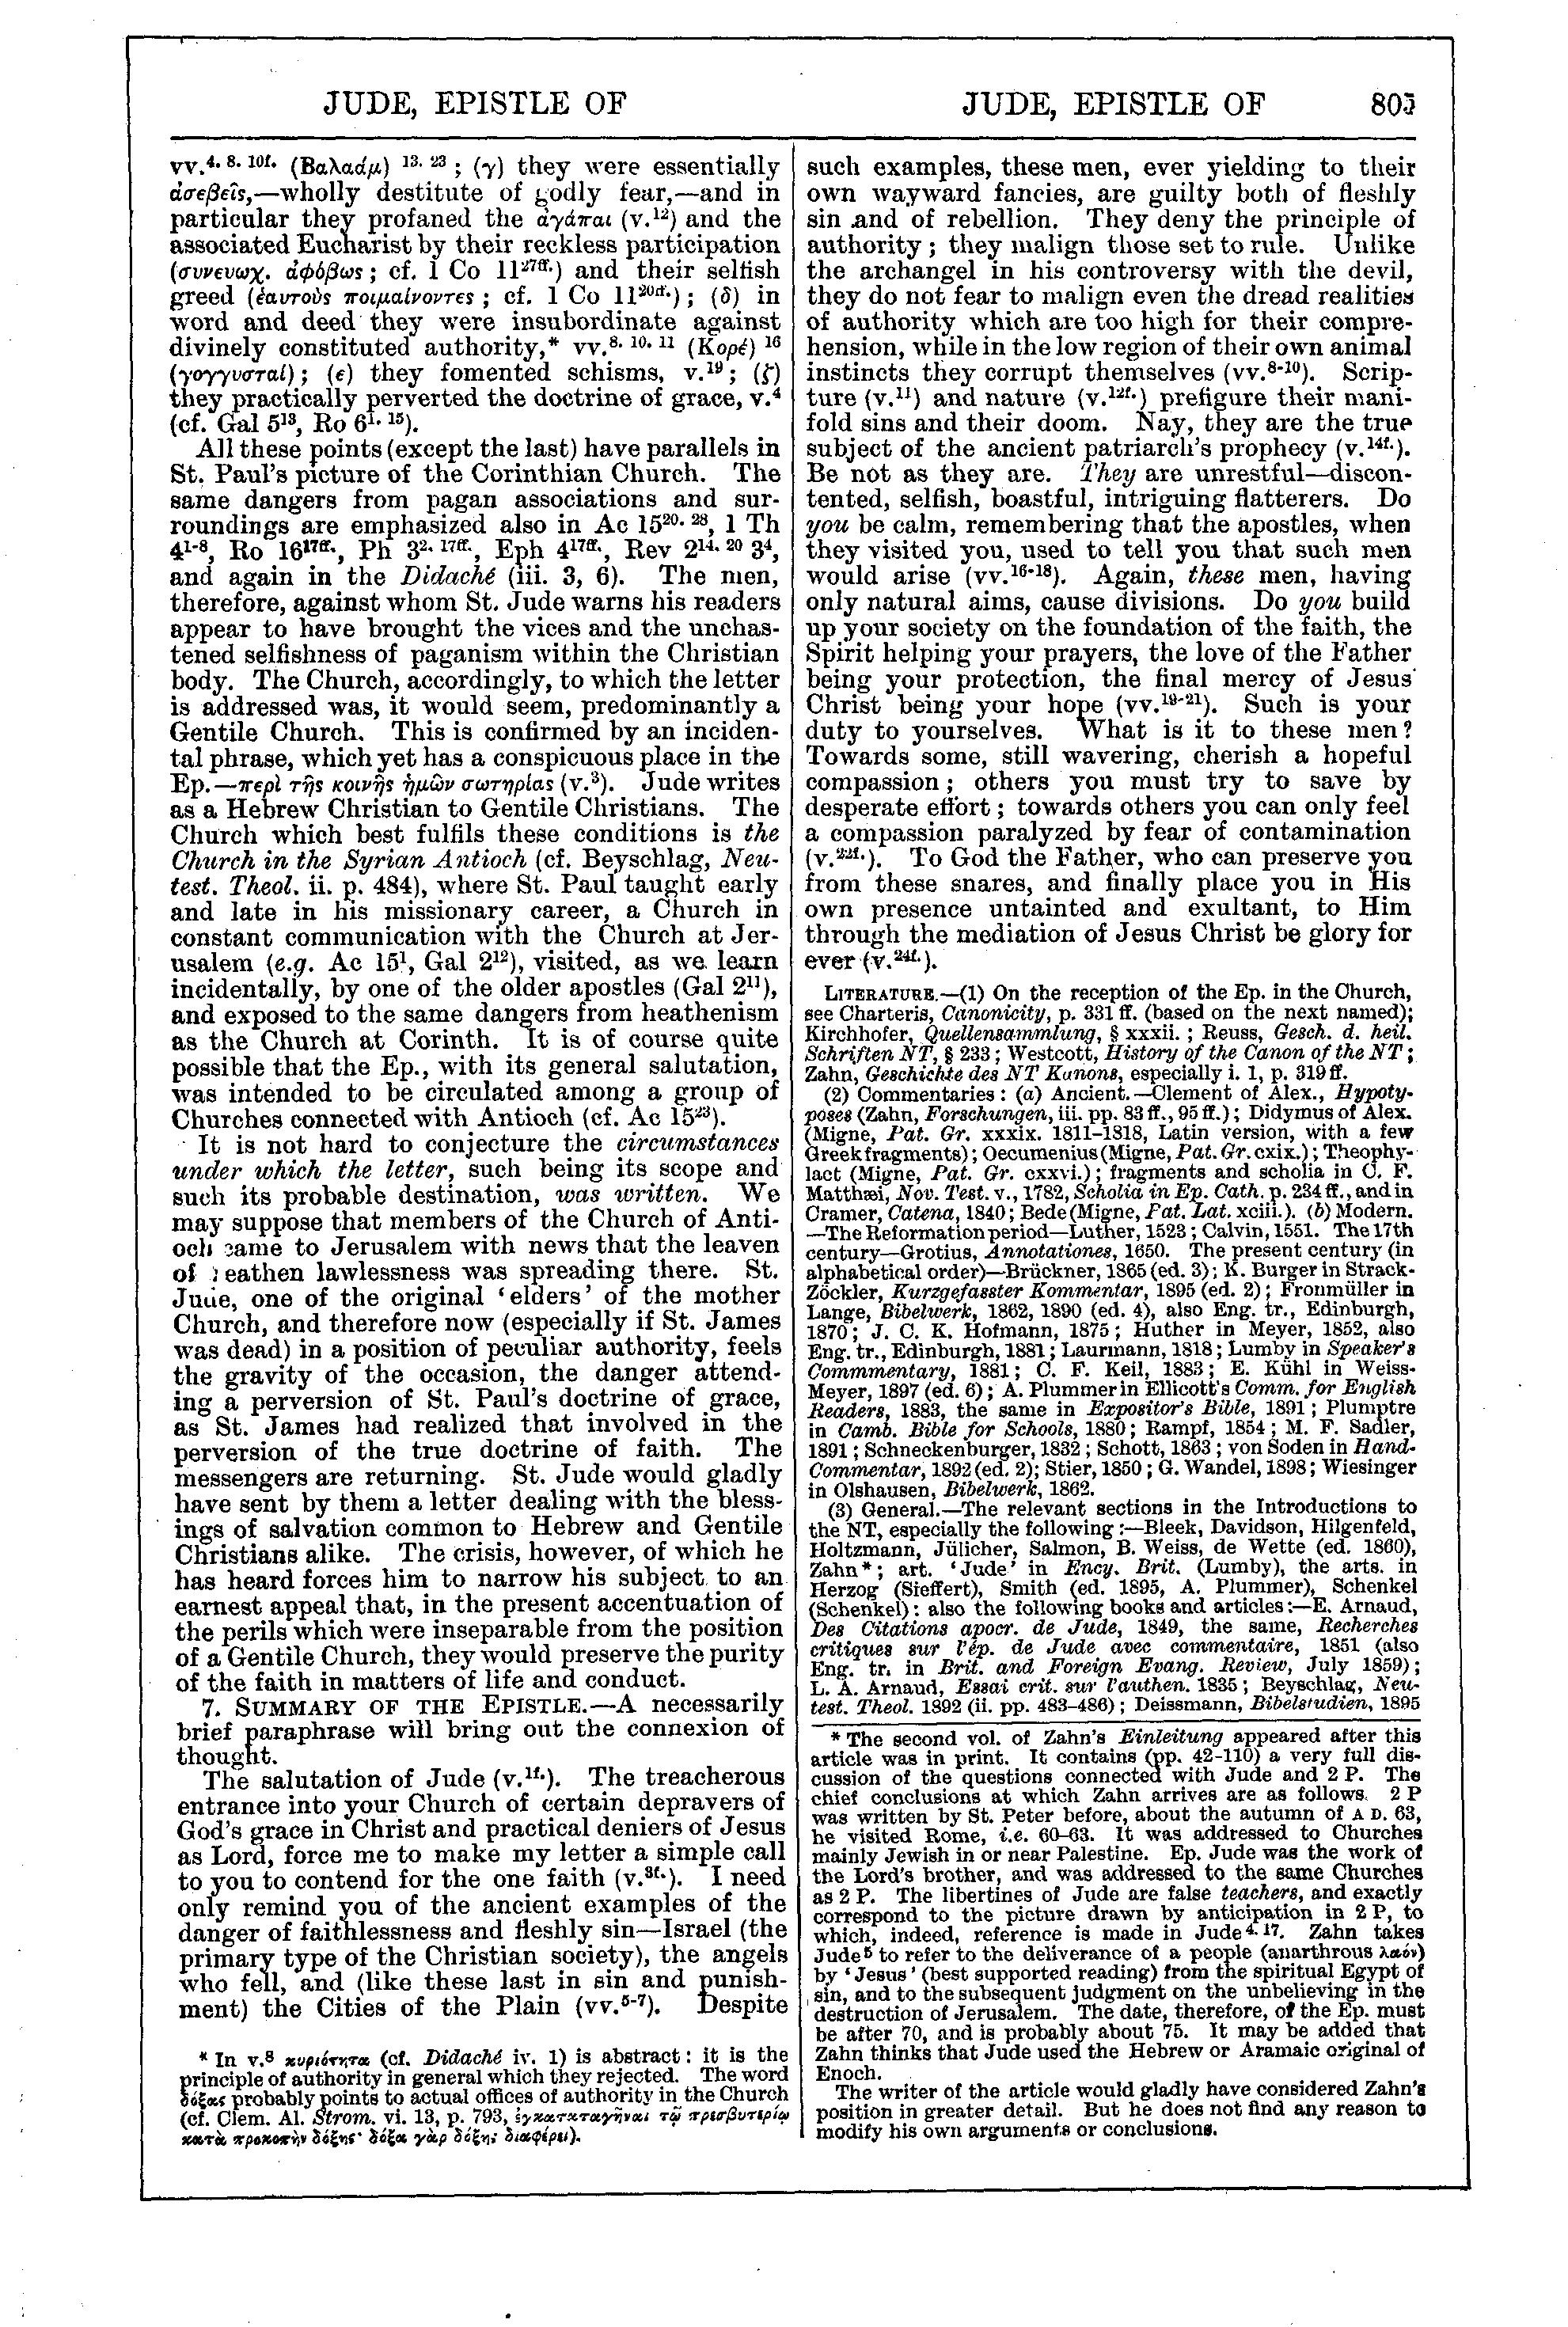 Image of page 805